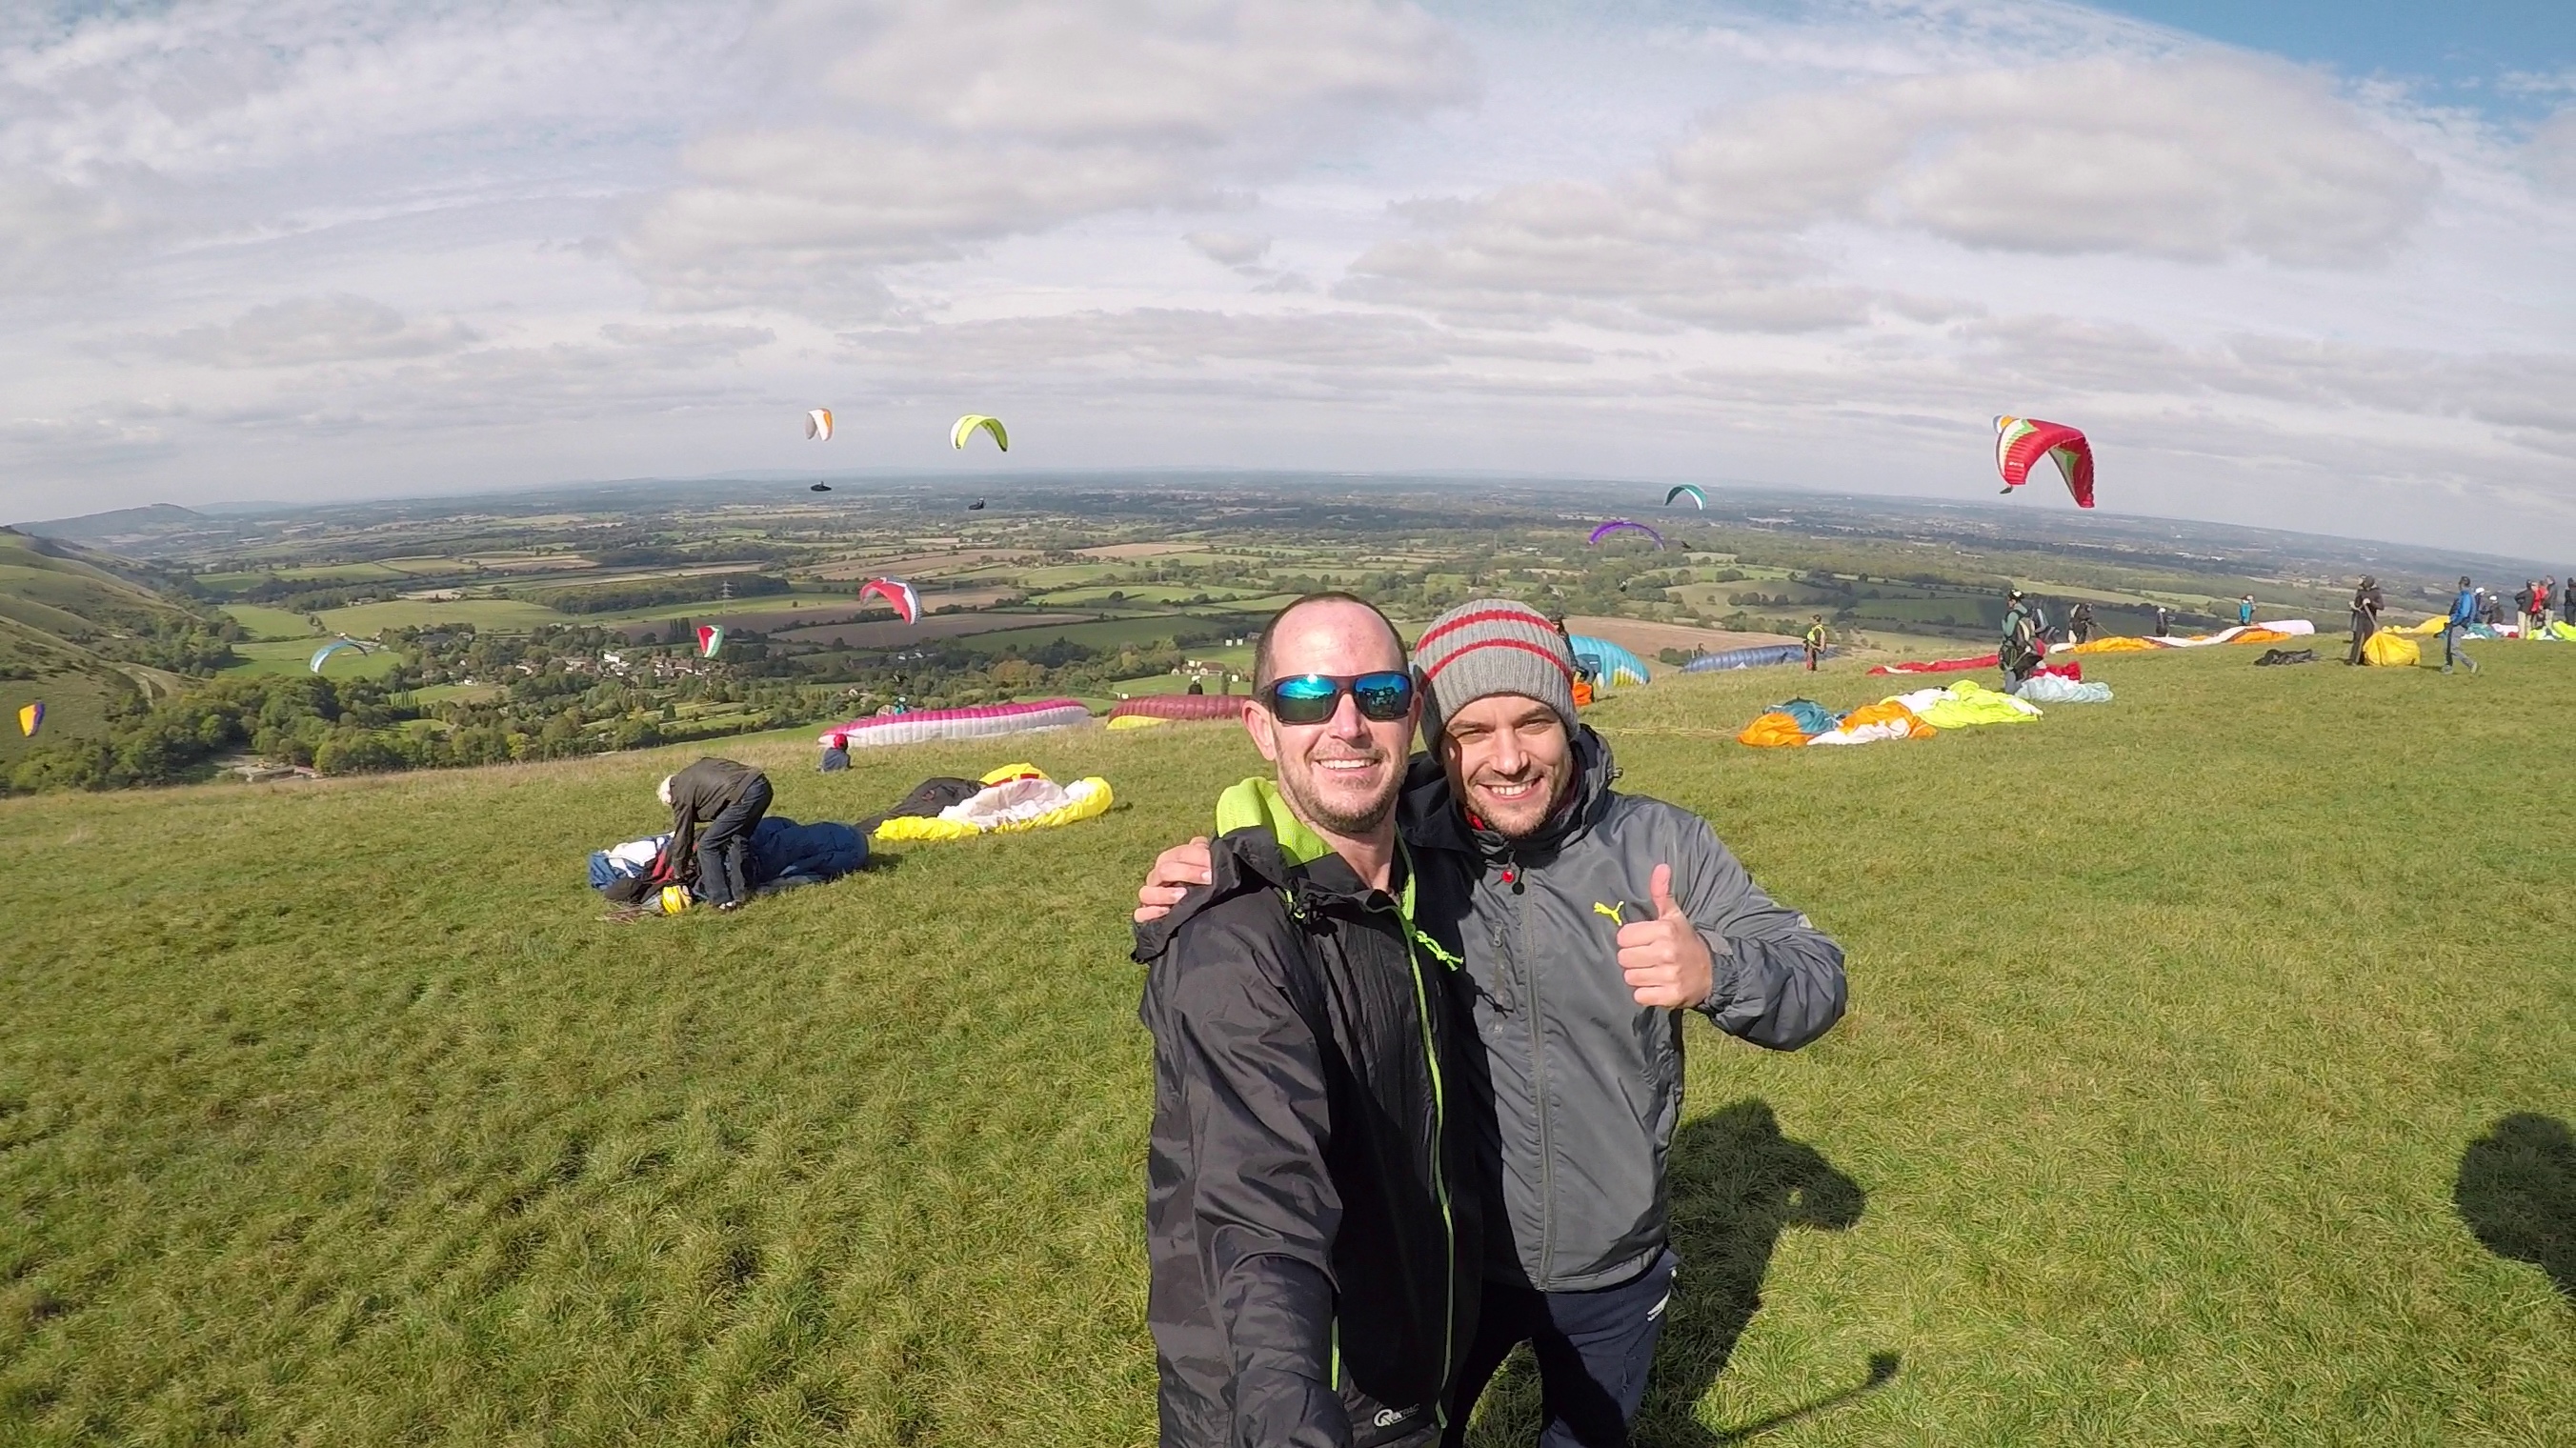 Things to do in Sussex experience days out with Mile High Paragliding